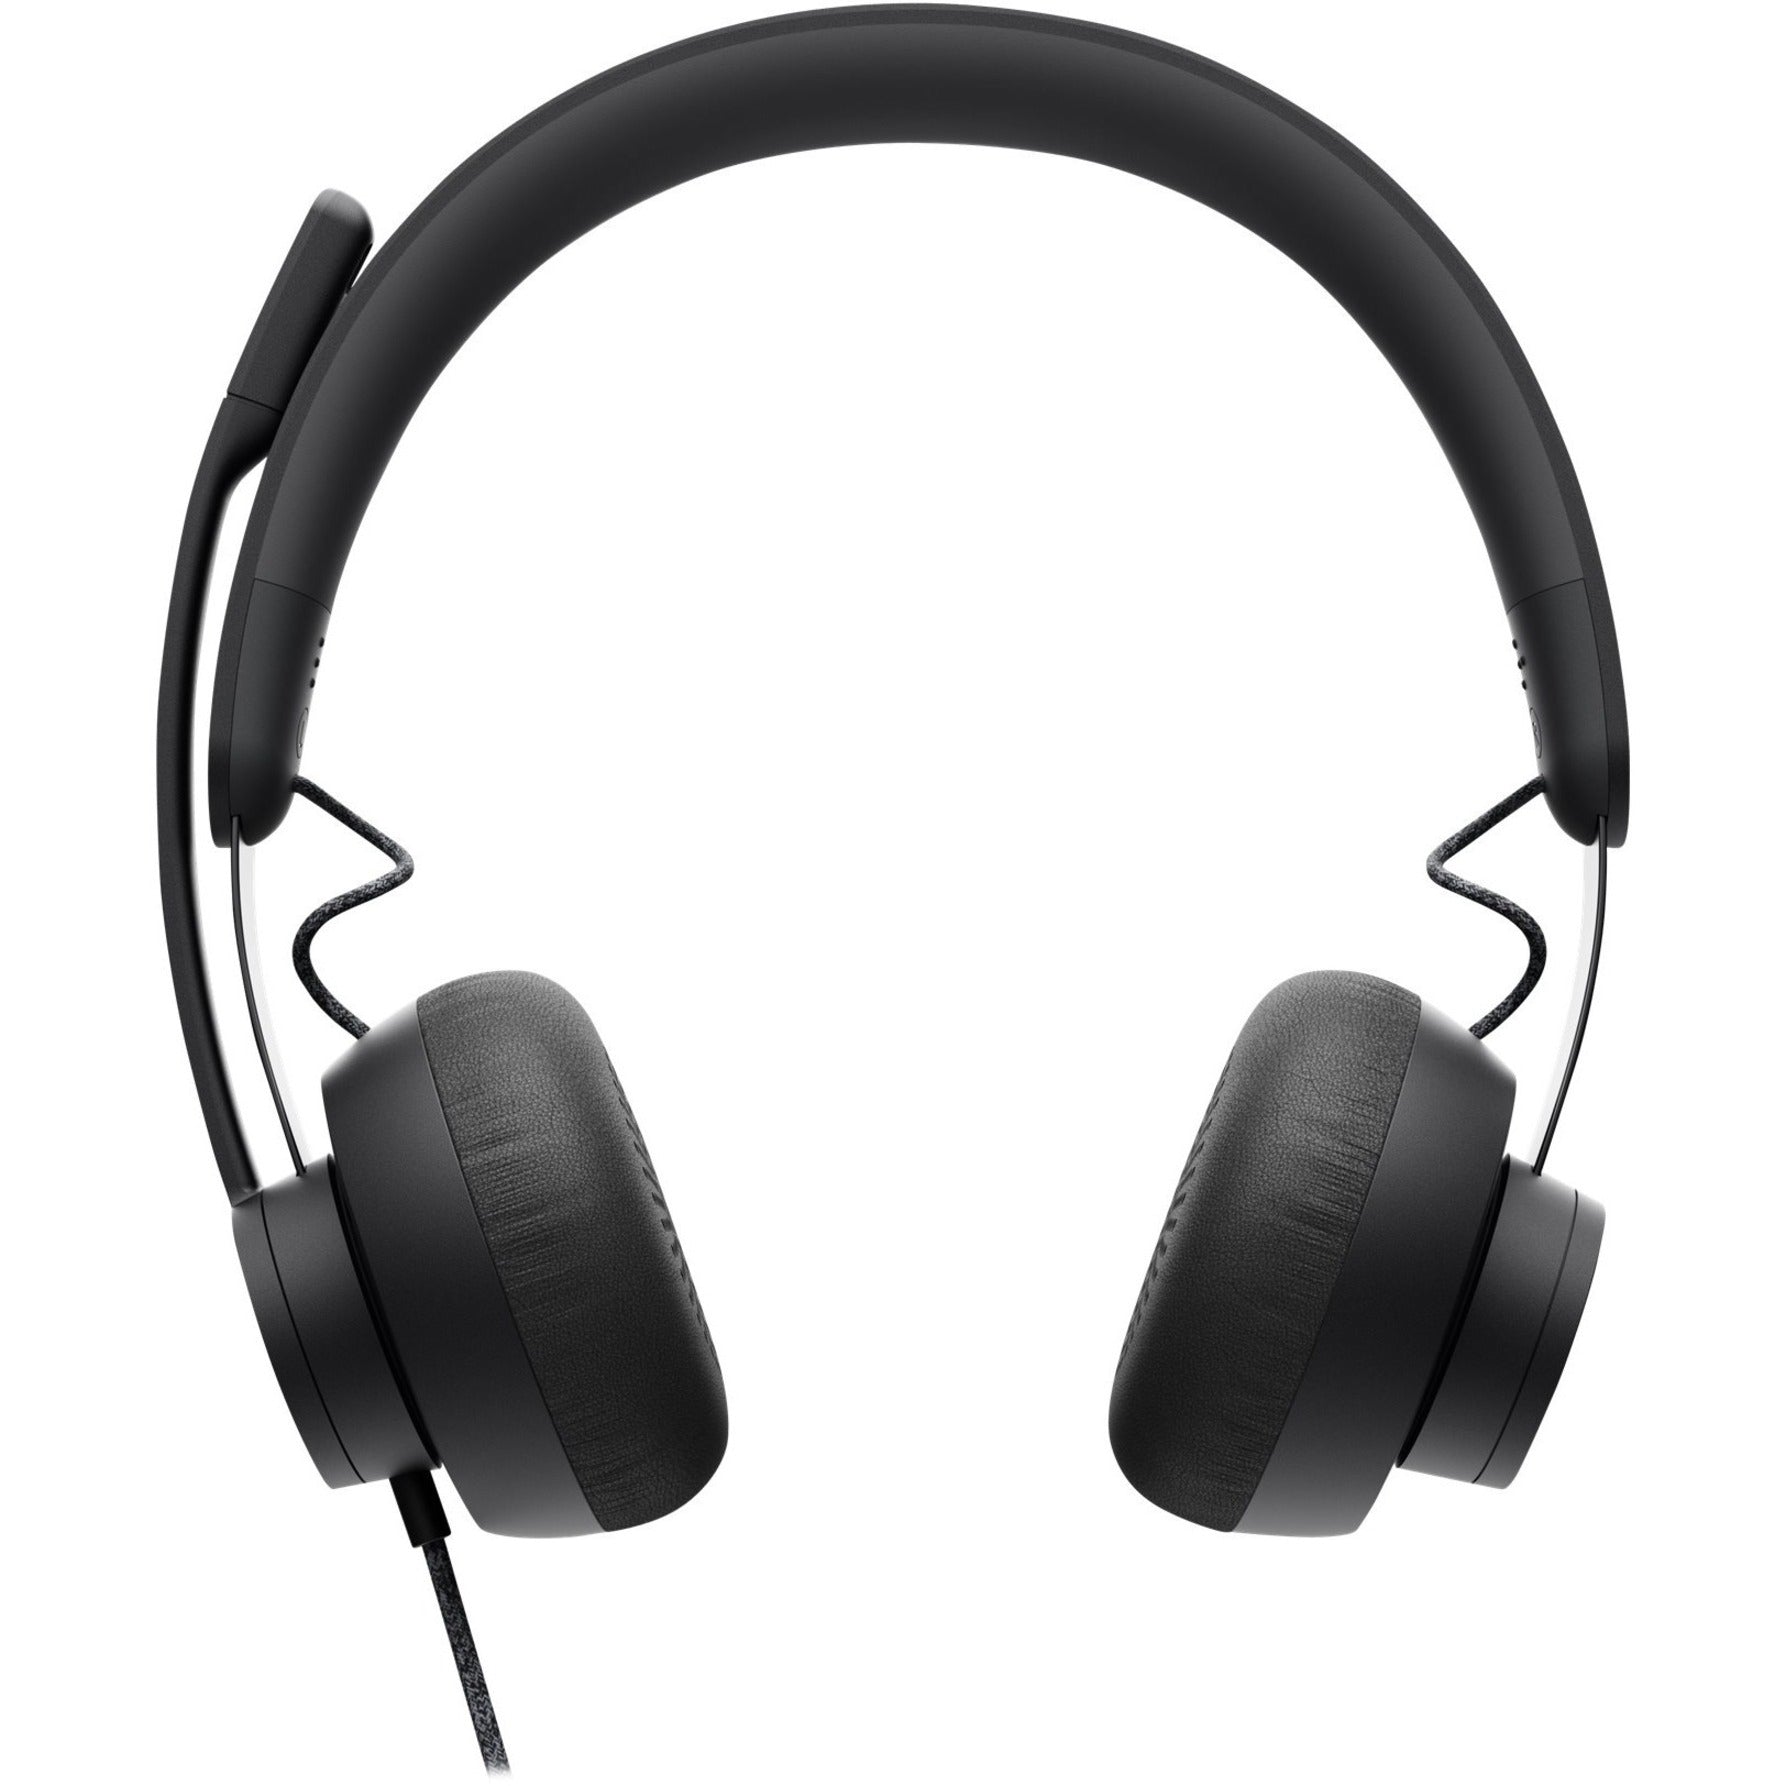 Logitech 981-000876 Zone Headset, USB Type C, 2 Year Warranty, Comfortable and Tangle-free Cable